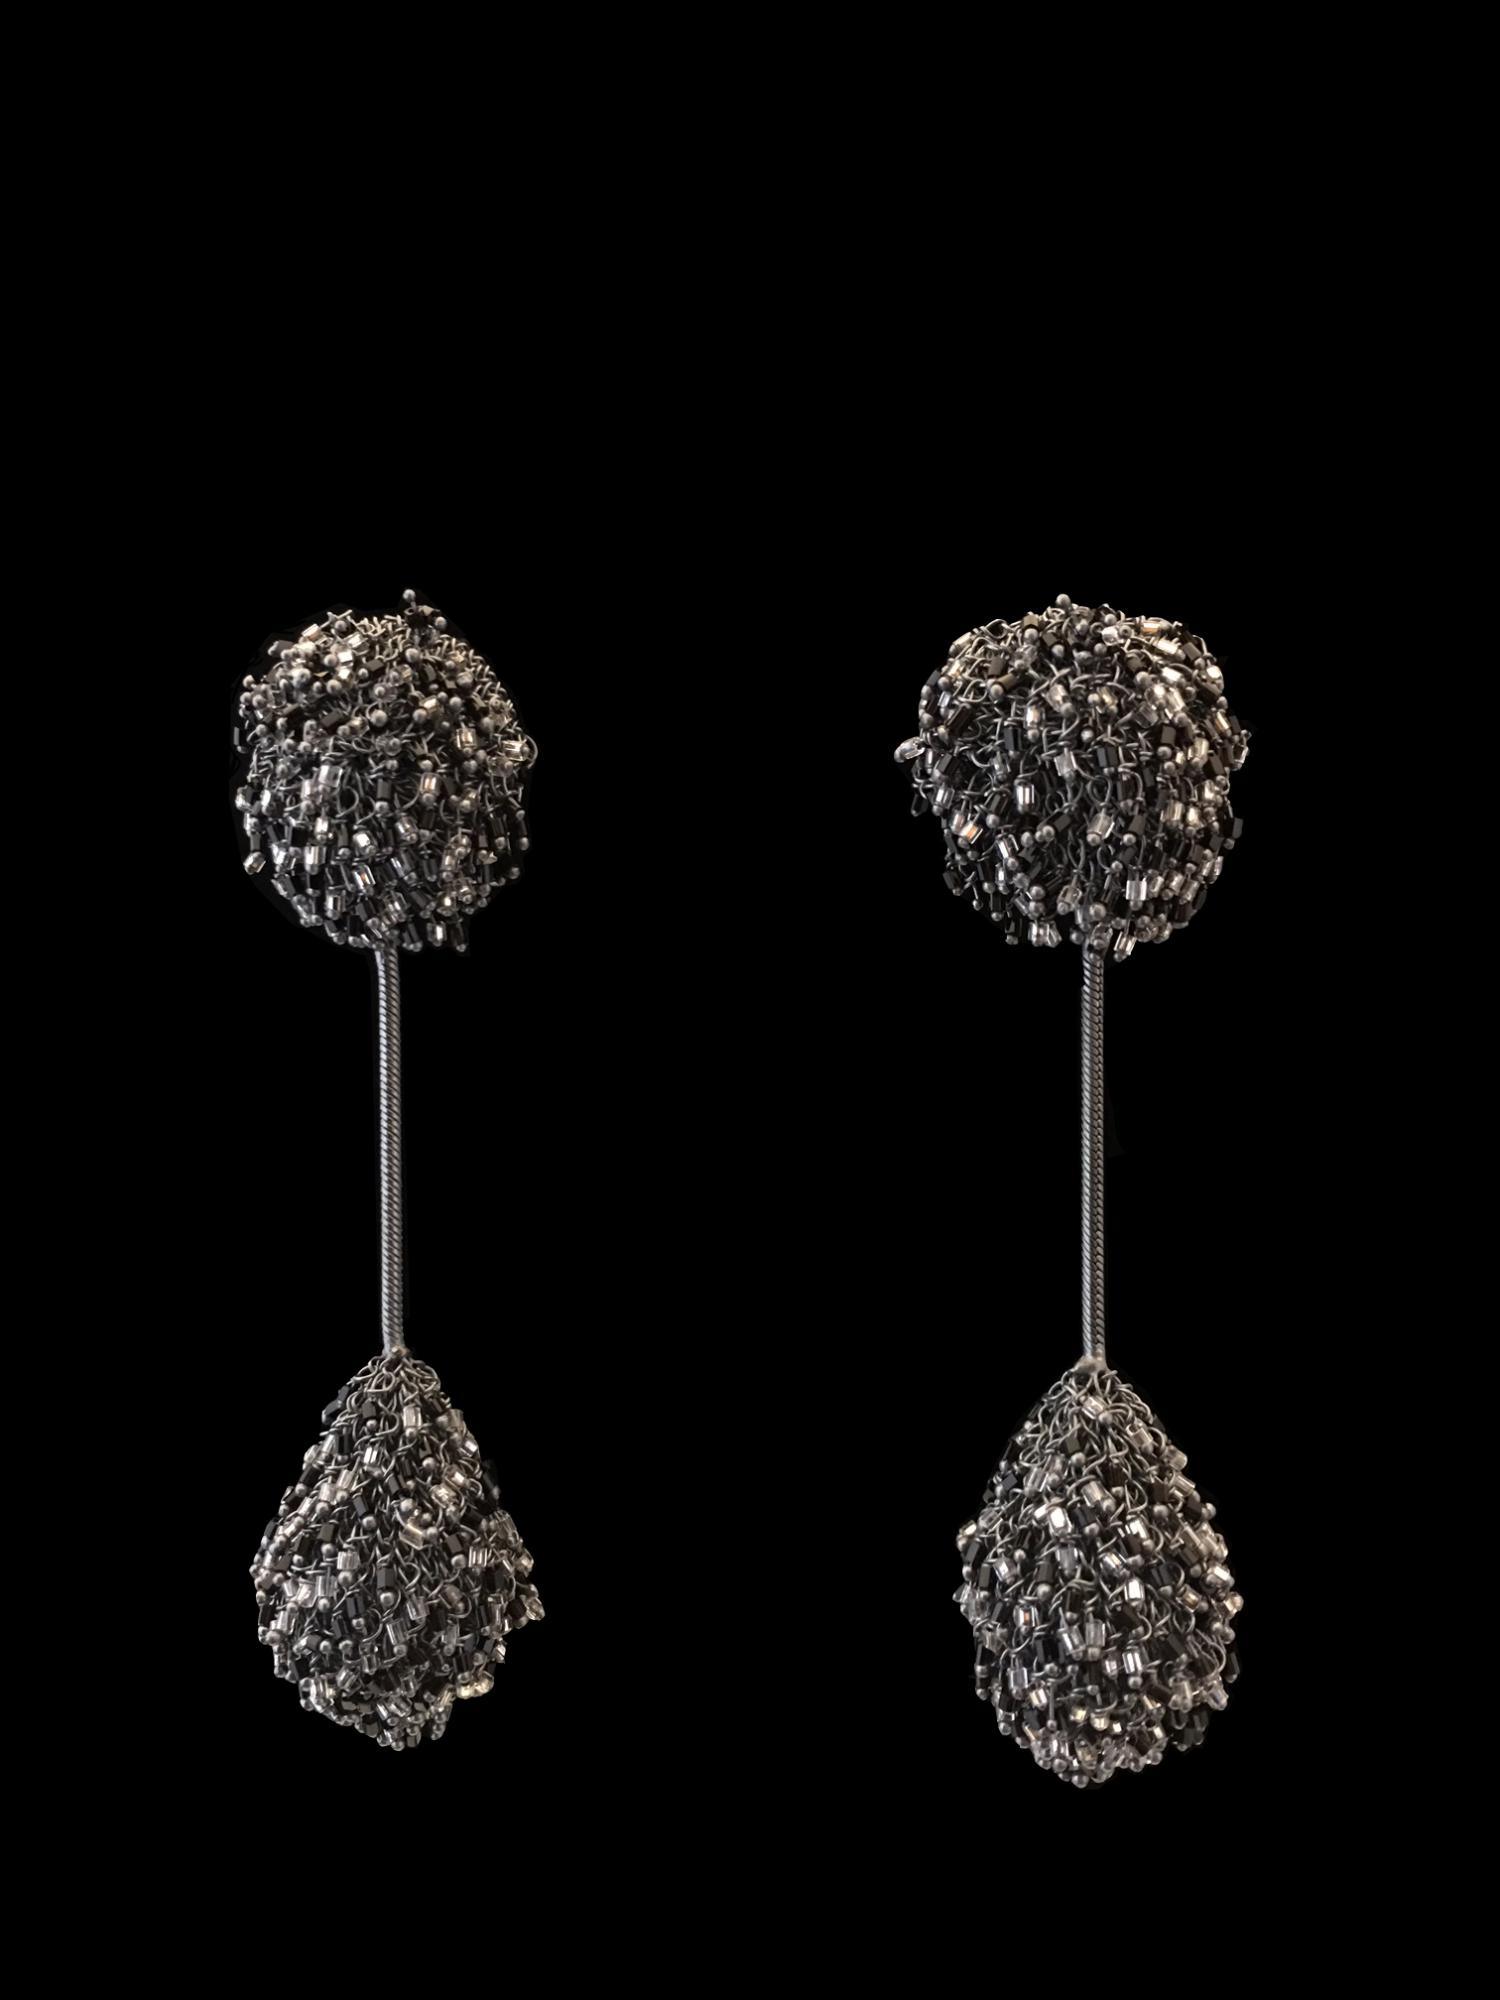 Woven Earrings with Swarovski Crystals (52ZBR)